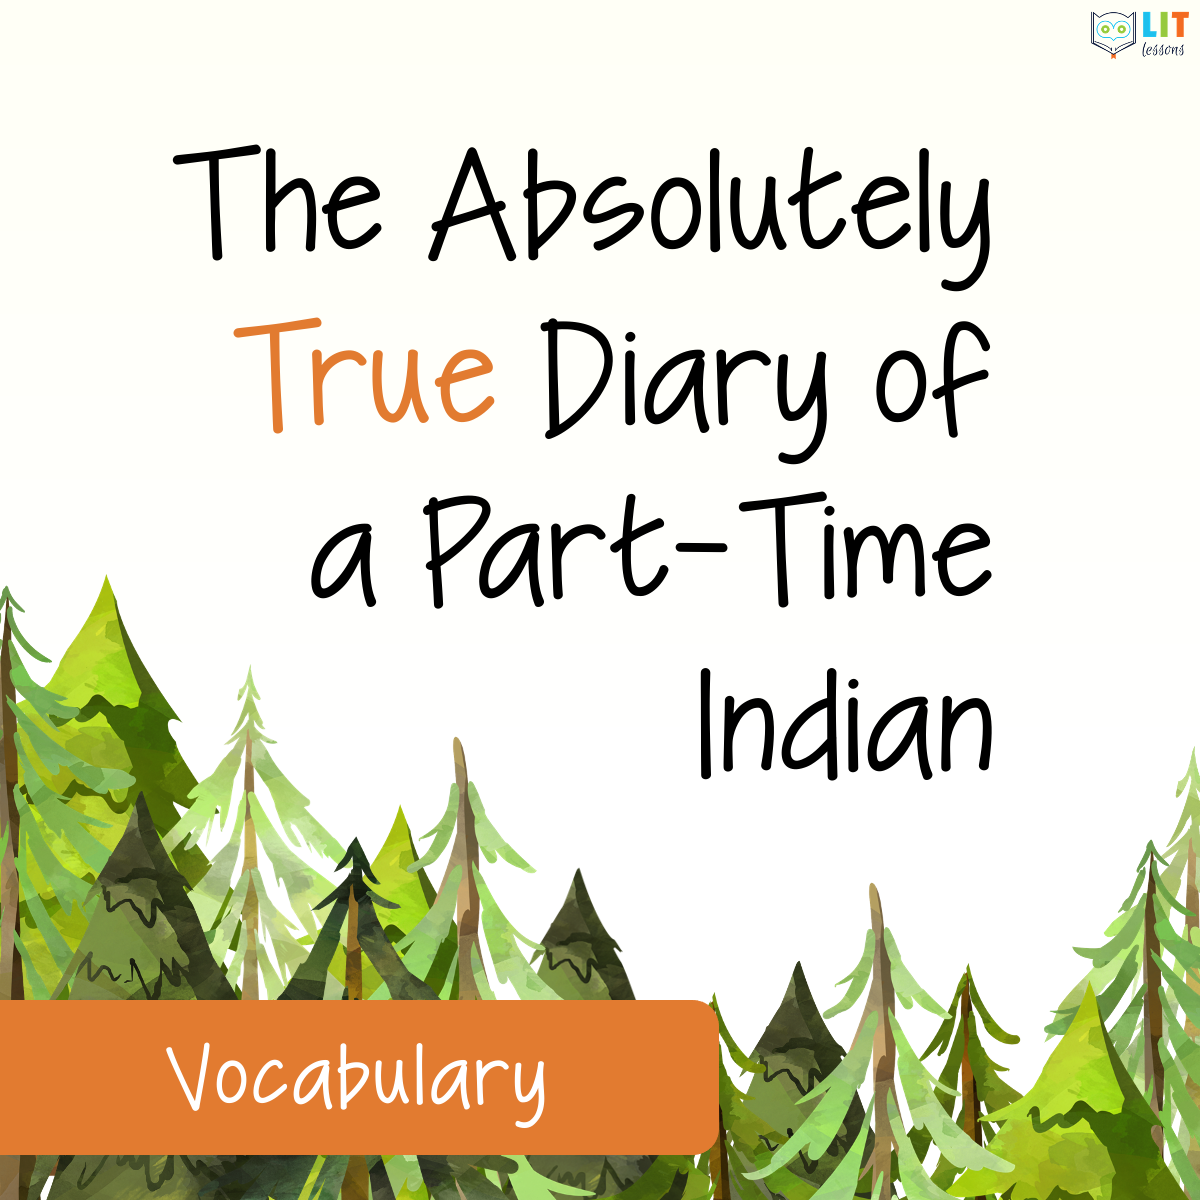 The Absolutely True Diary of a Part-Time Indian Vocabulary